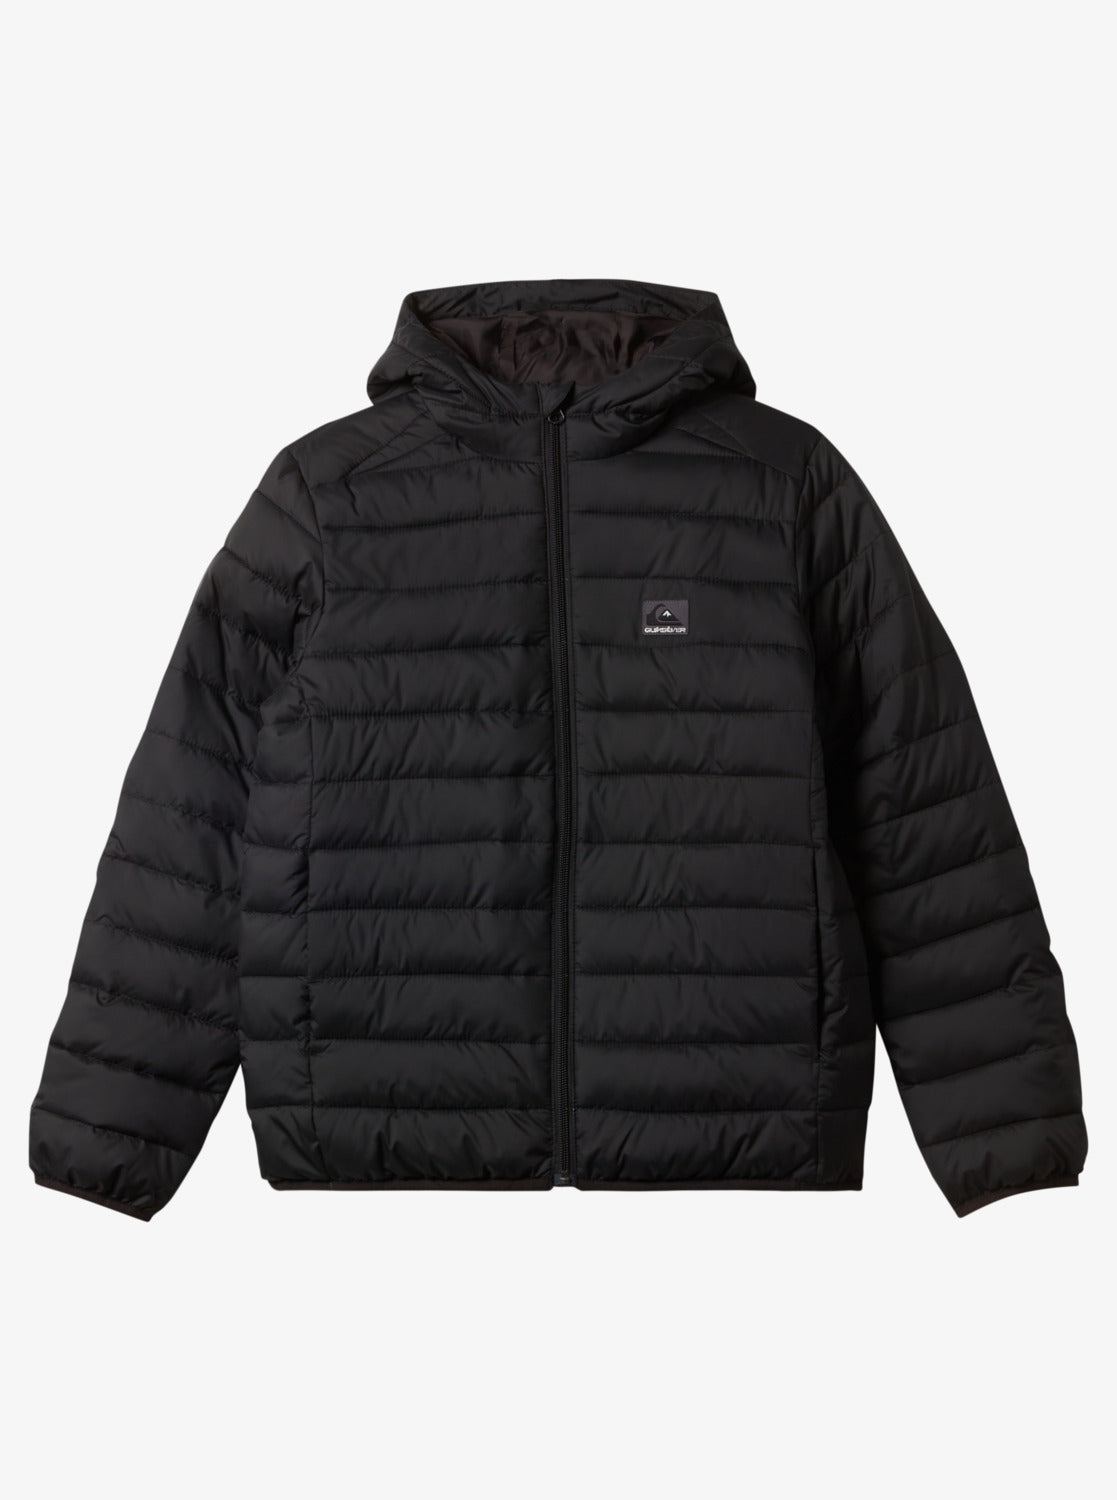 Quiksilver Scaly Youth Jacket  Black Colourway Front